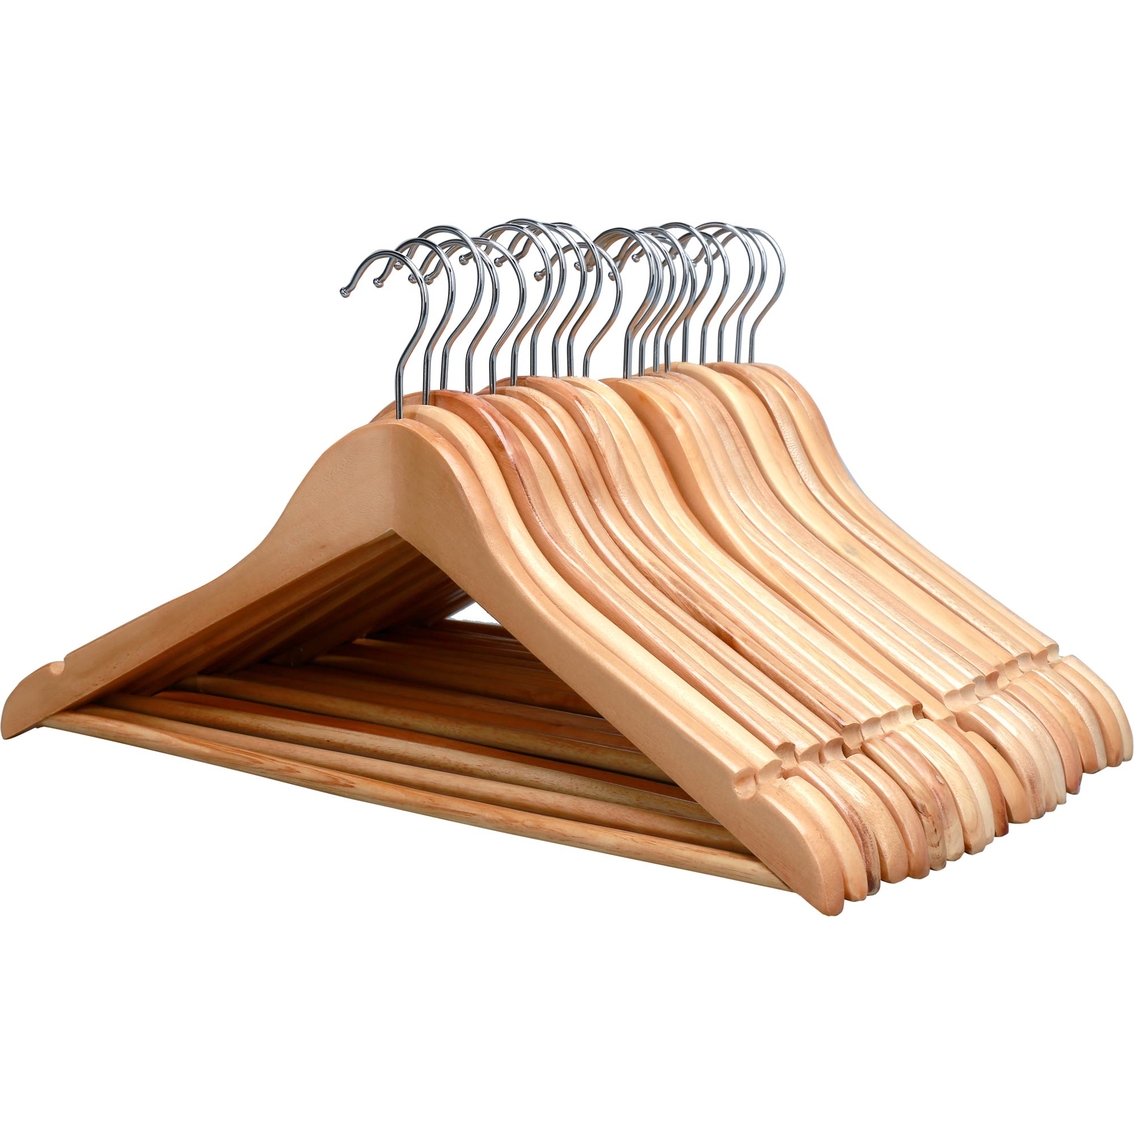 Quality Hangers Wooden Hangers Beautiful Sturdy Suit Curved Hangers Great  for Travelers Heavy Duty Coat Hanger with Locking Bar Gold Hooks (5 Pack)